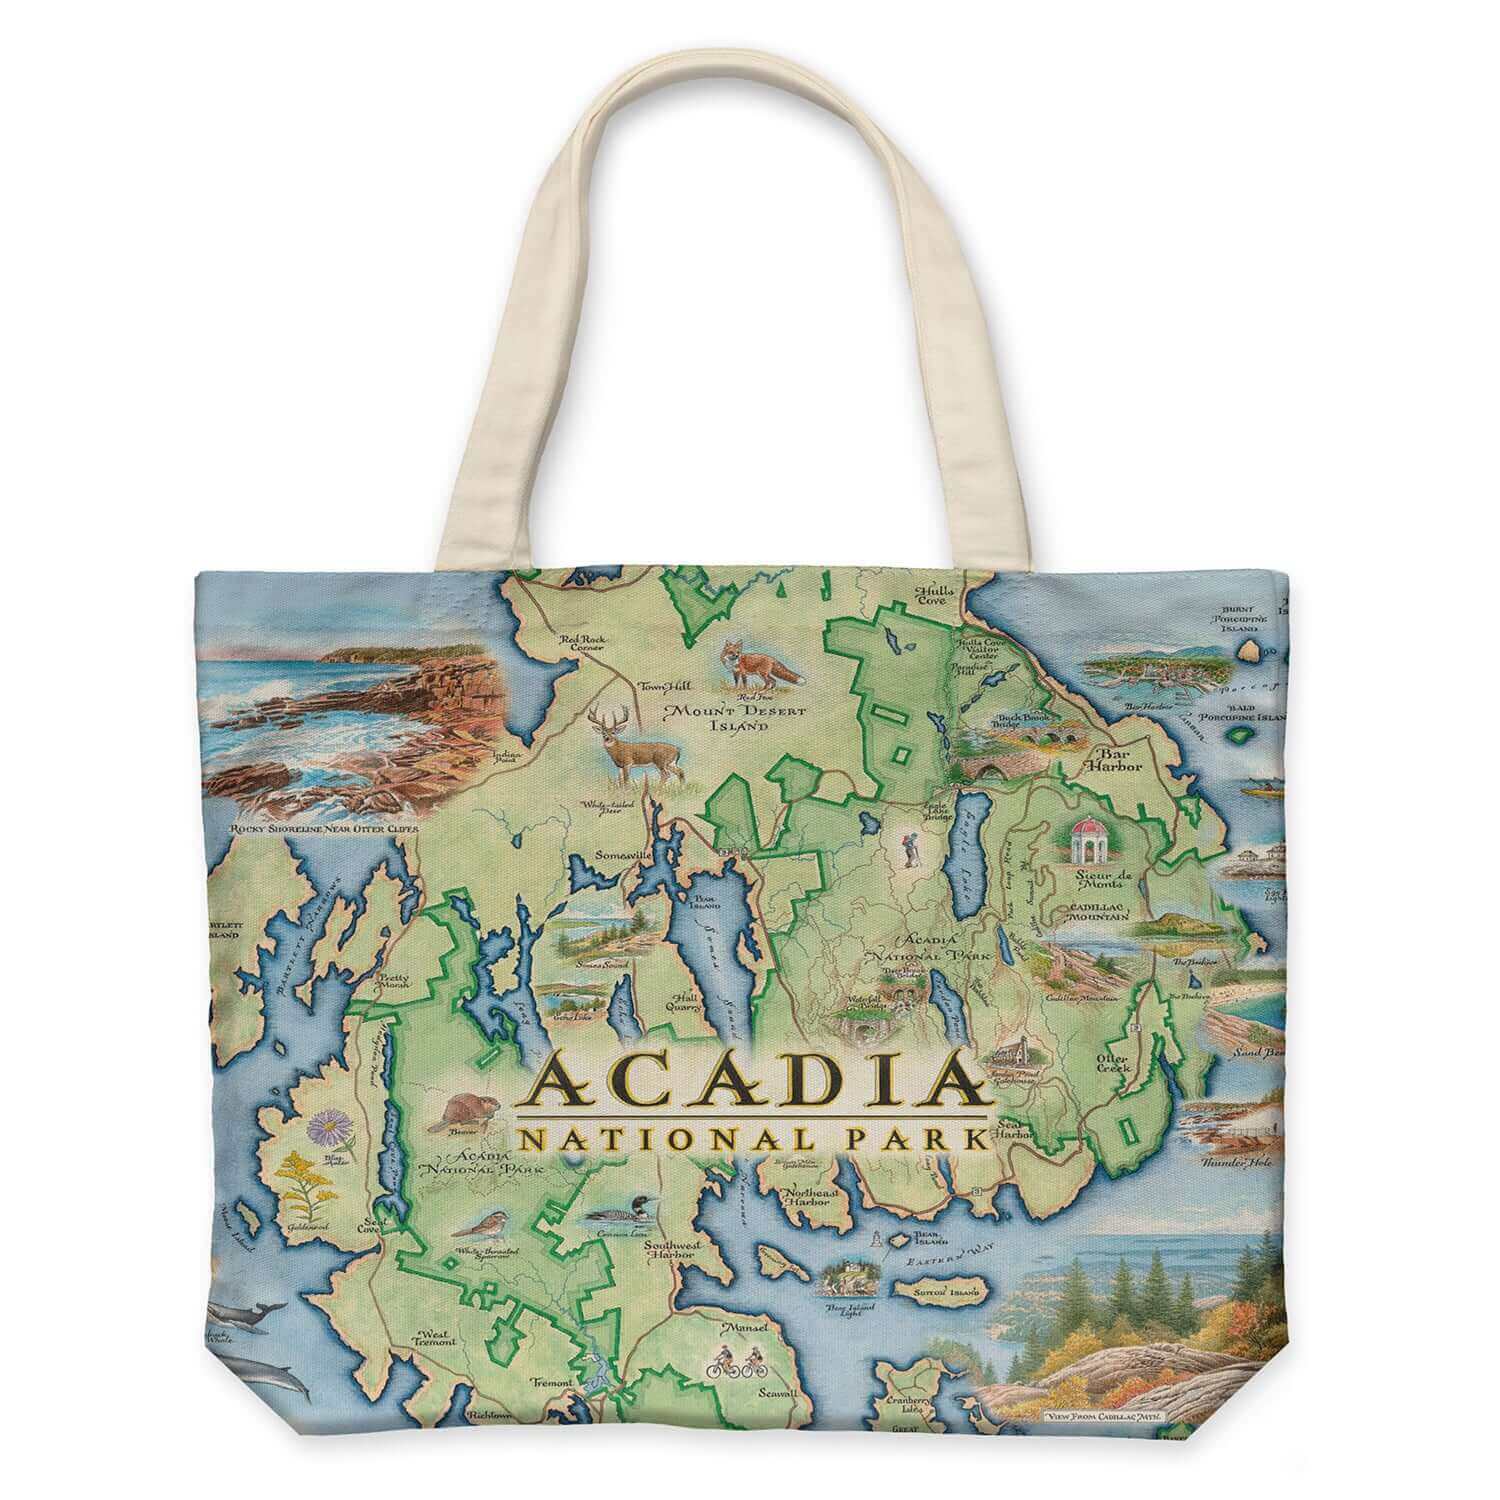 Maine's Acadia National Park Map Canvas Tote Bag in Earth Tone colors. Featuring Otter Cliffs, Thunder Hole, Mount Desert Island, and a lighthouse. Flora and fauna include; native flowers, a fox, a deer, a beaver, birds, and whales. 